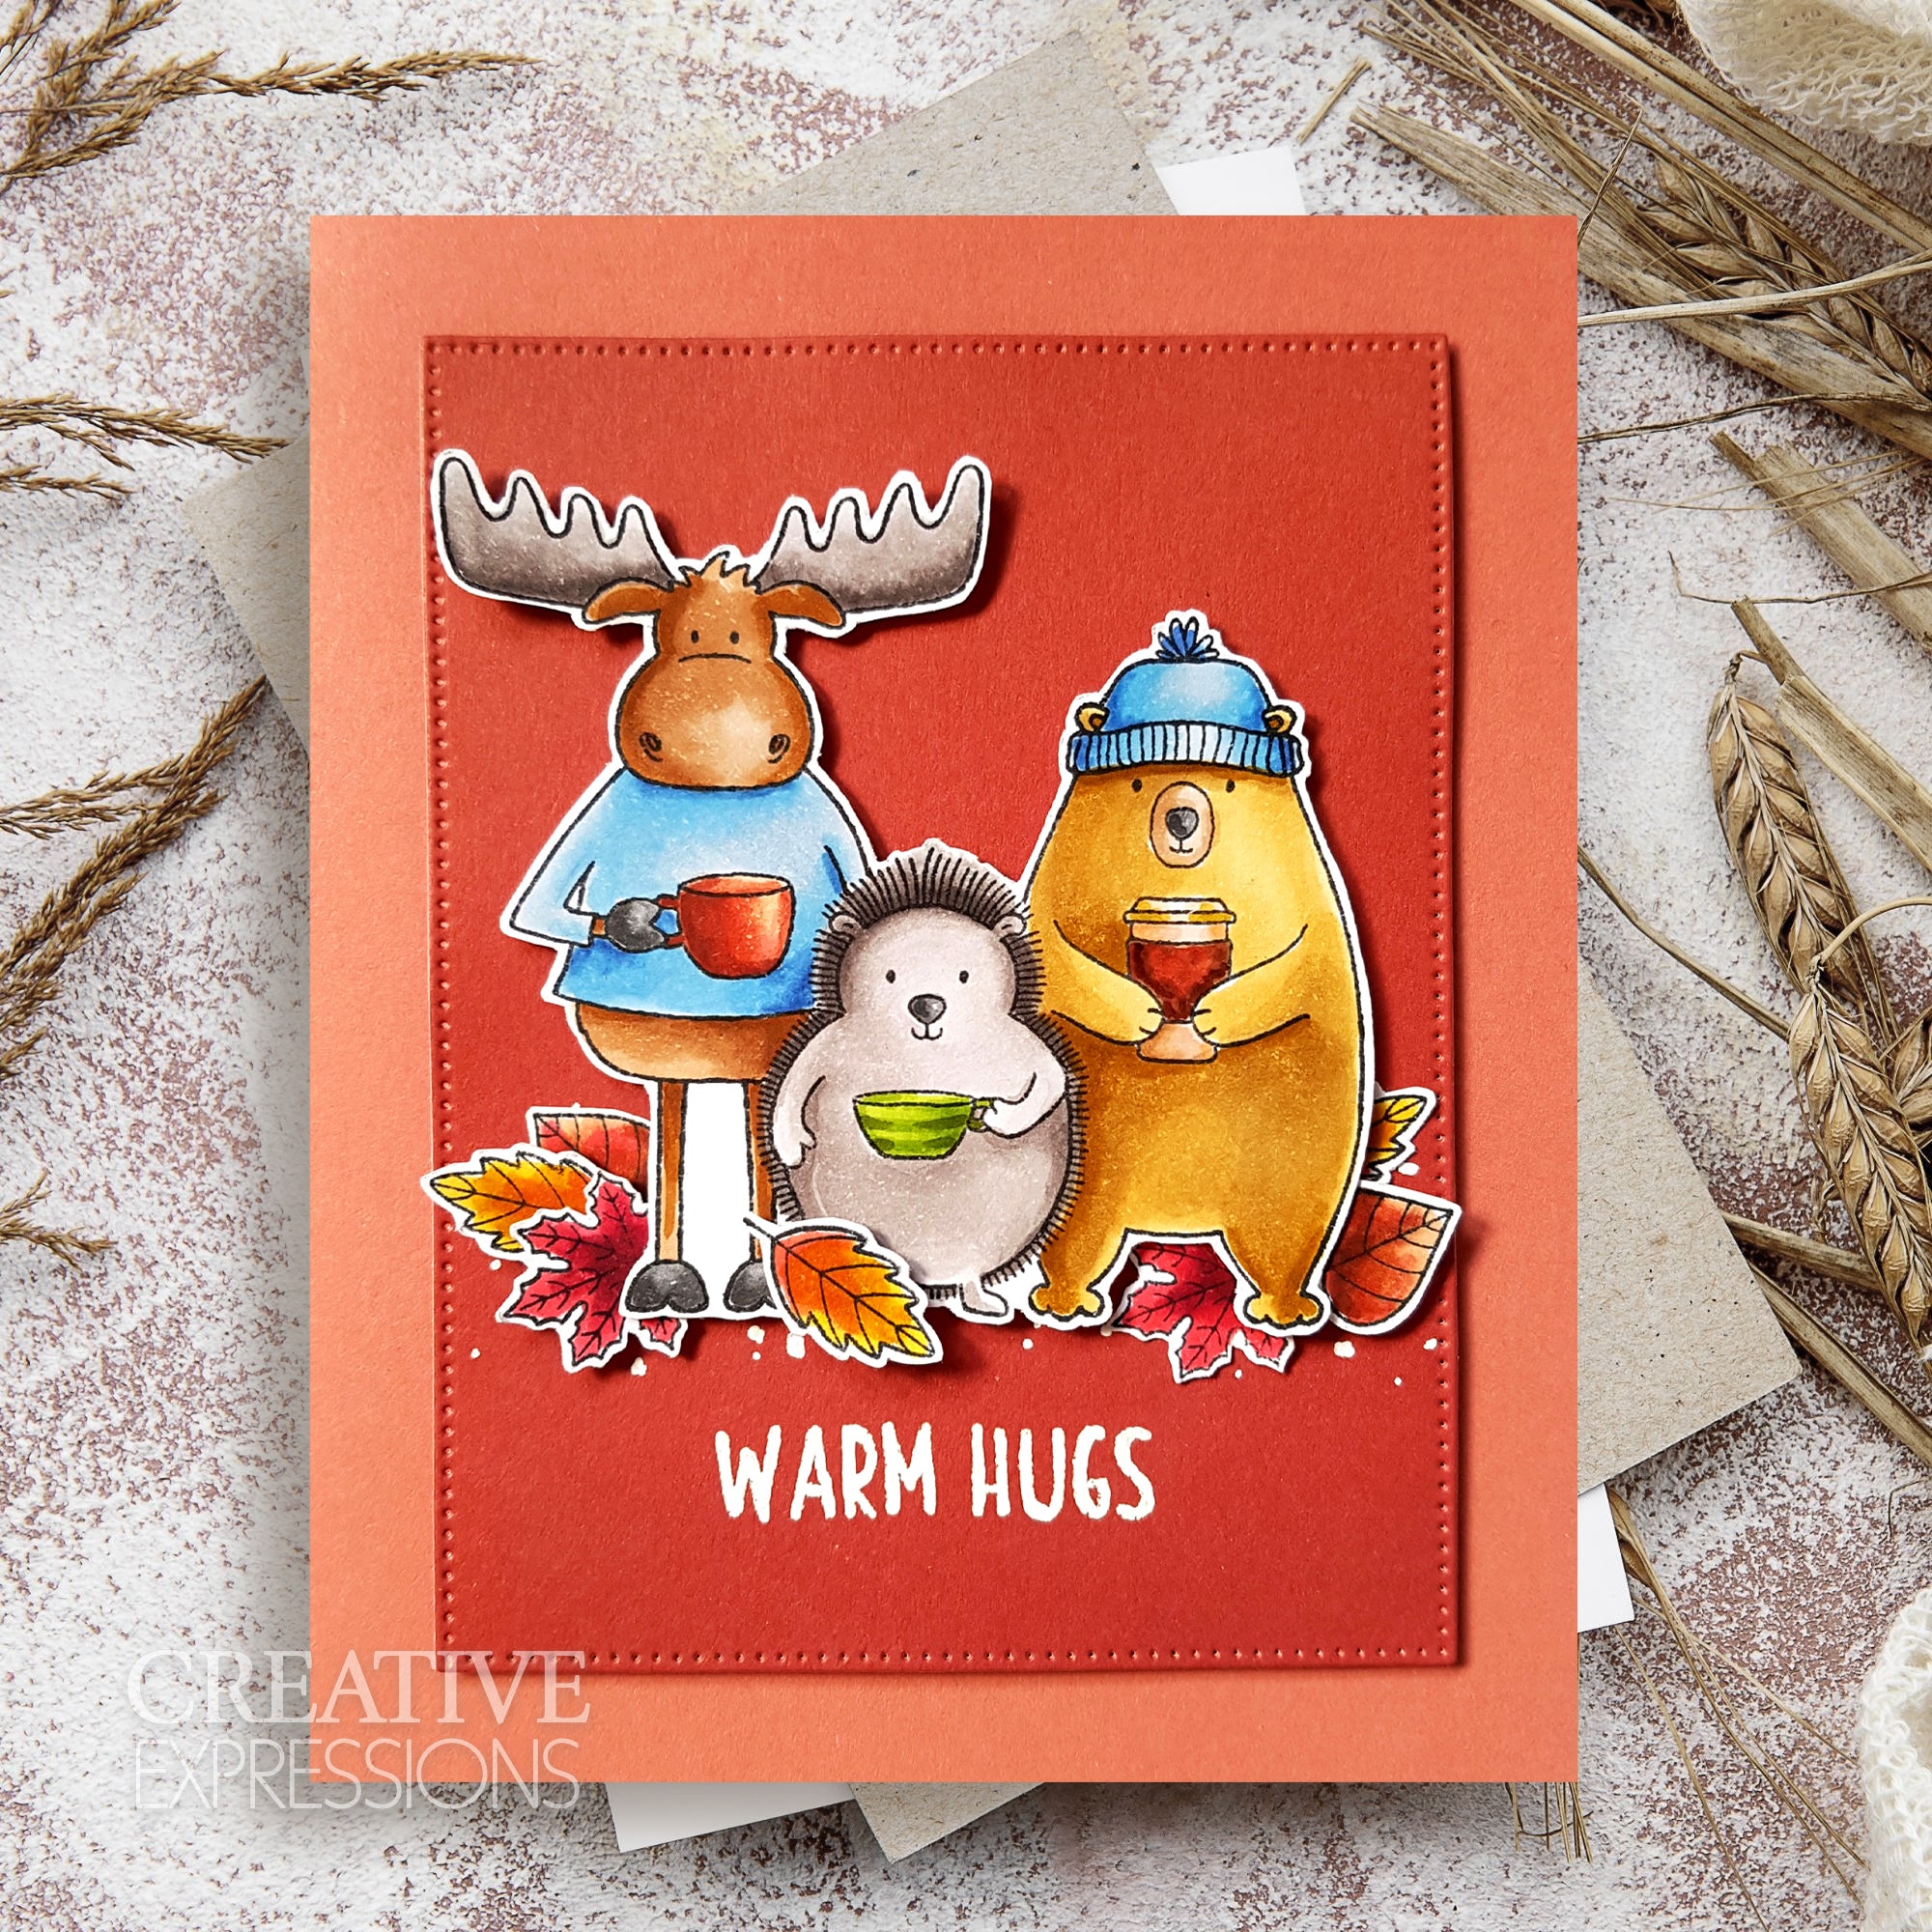 Creative Expressions Jane's Doodles Warm Hugs 6 in x 8 in Clear Stamp Set